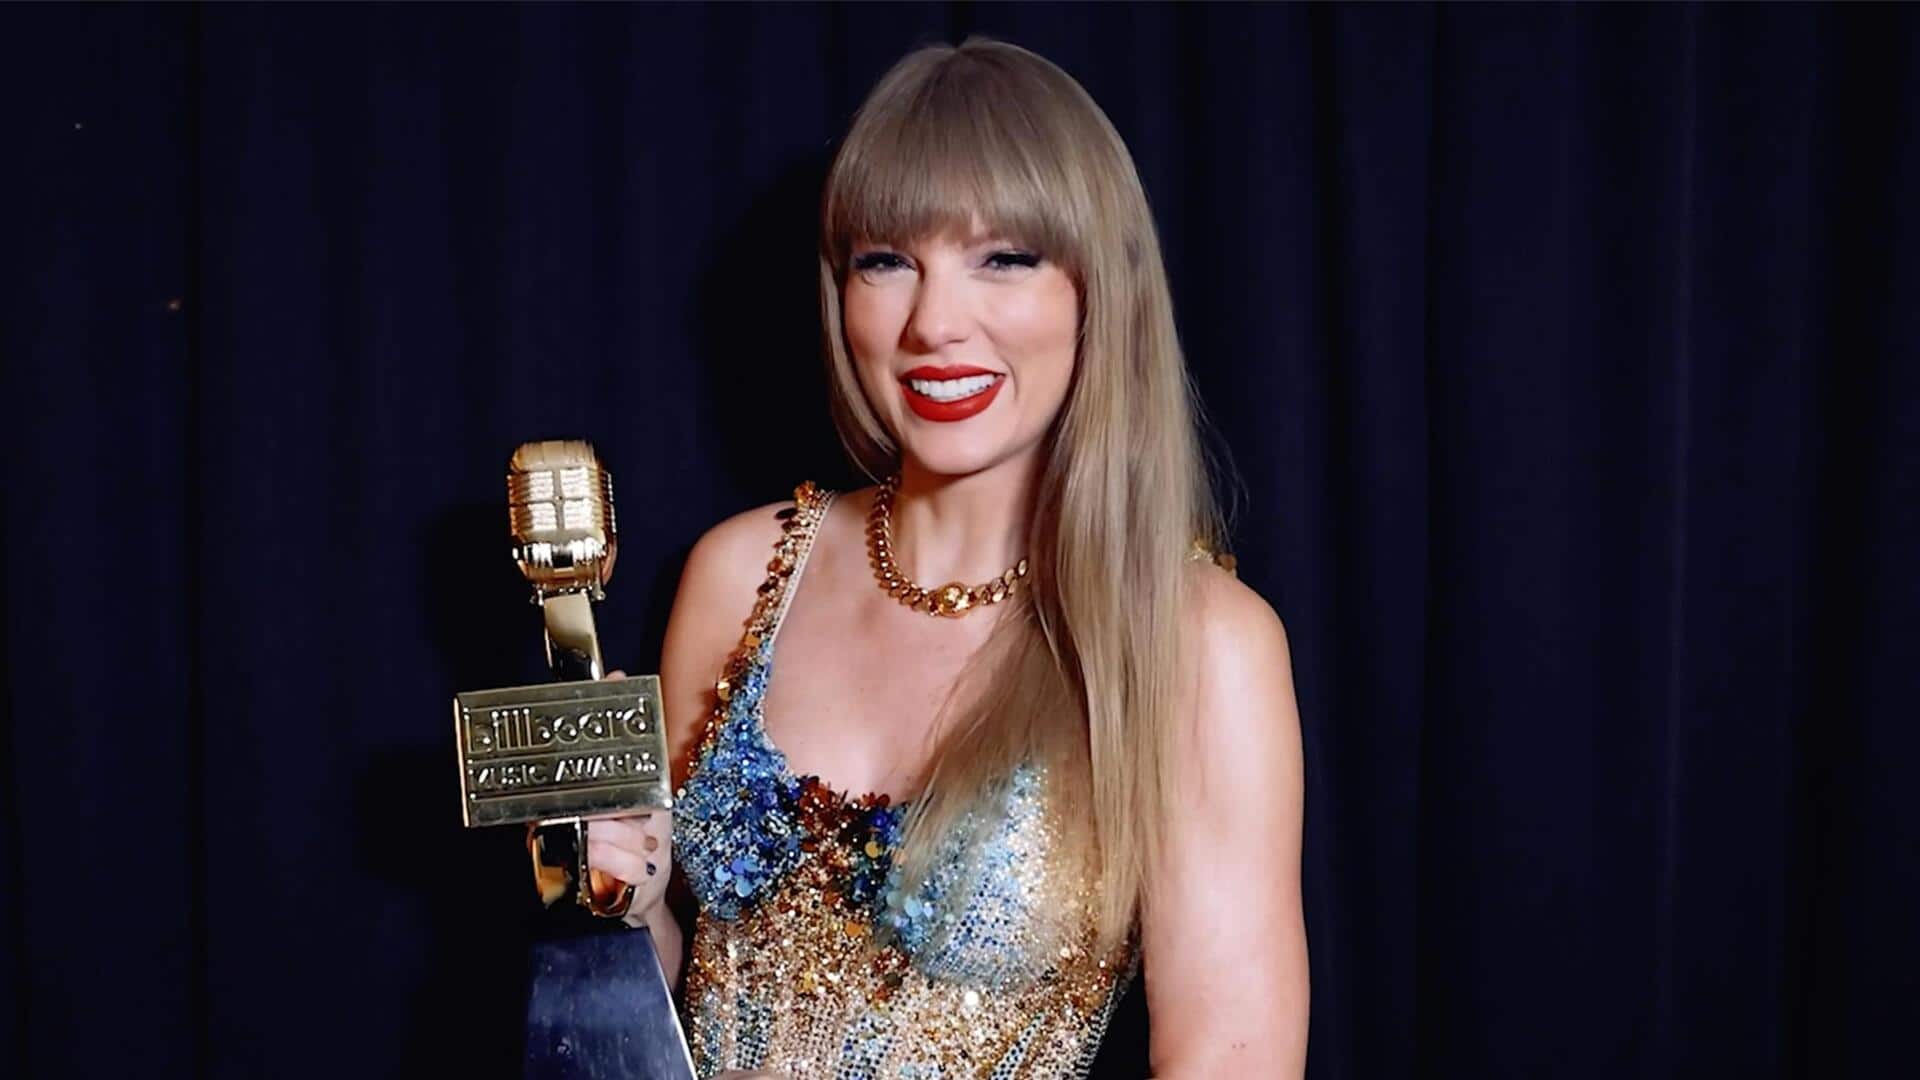 Billboard Music Awards 2023—Taylor Swift wins in whopping 10 categories!